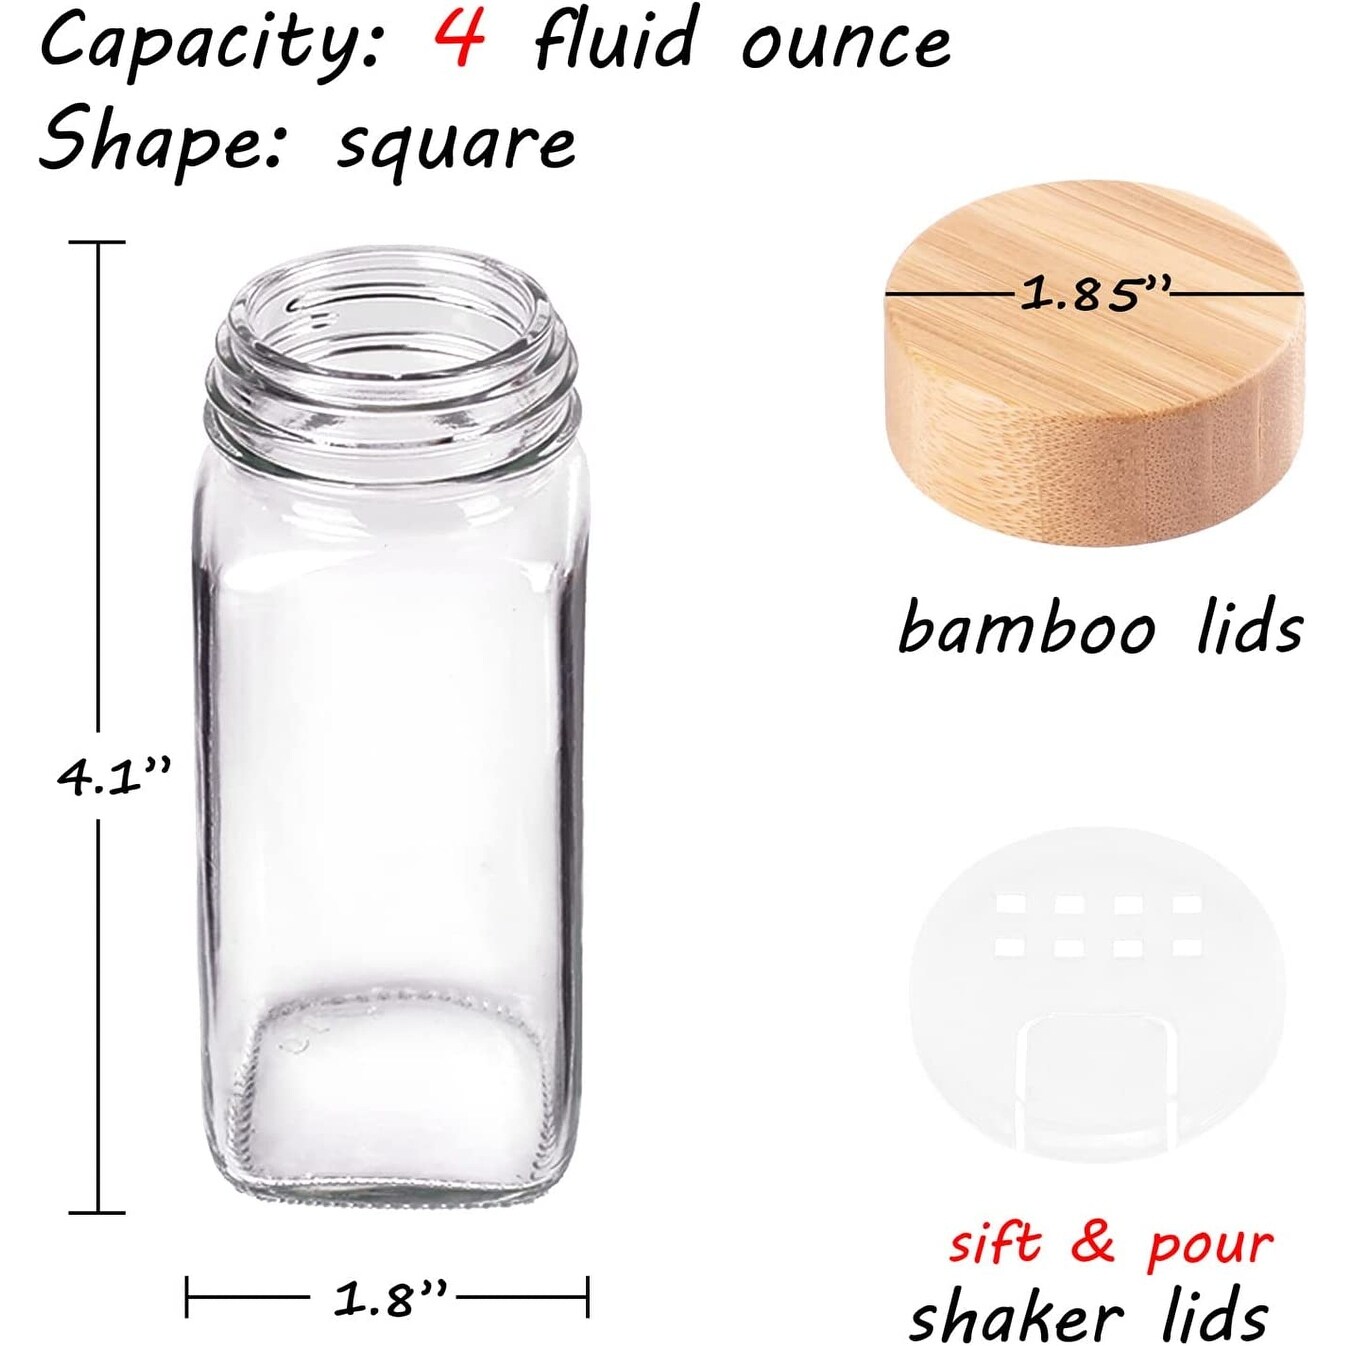 https://ak1.ostkcdn.com/images/products/is/images/direct/312a5d042b8320e268d4158ba93a4be2e05466fa/48-Spice-Jars-with-Labels--Spice-Jars-with-Bamboo-Lids---4-Oz-Glass-Spice-Containers-with-Shaker-Lids.jpg